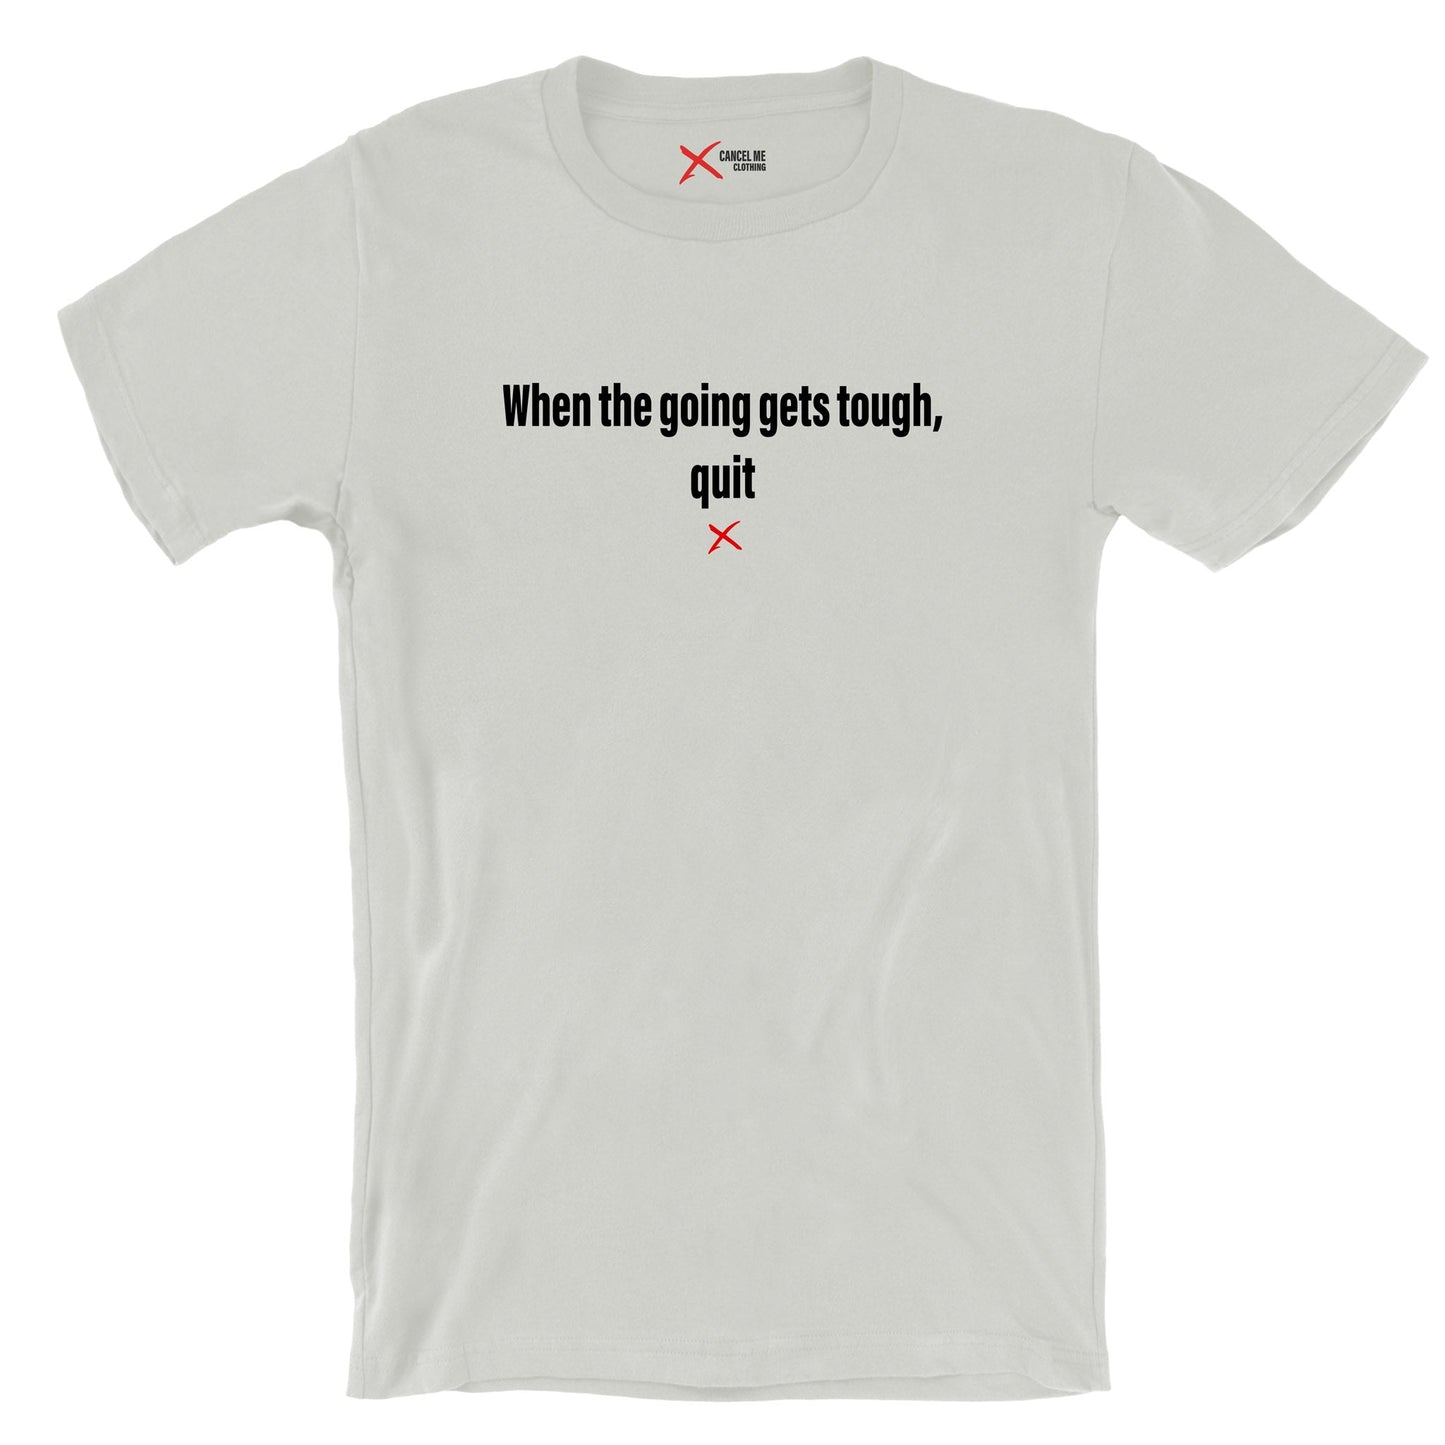 When the going gets tough, quit - Shirt